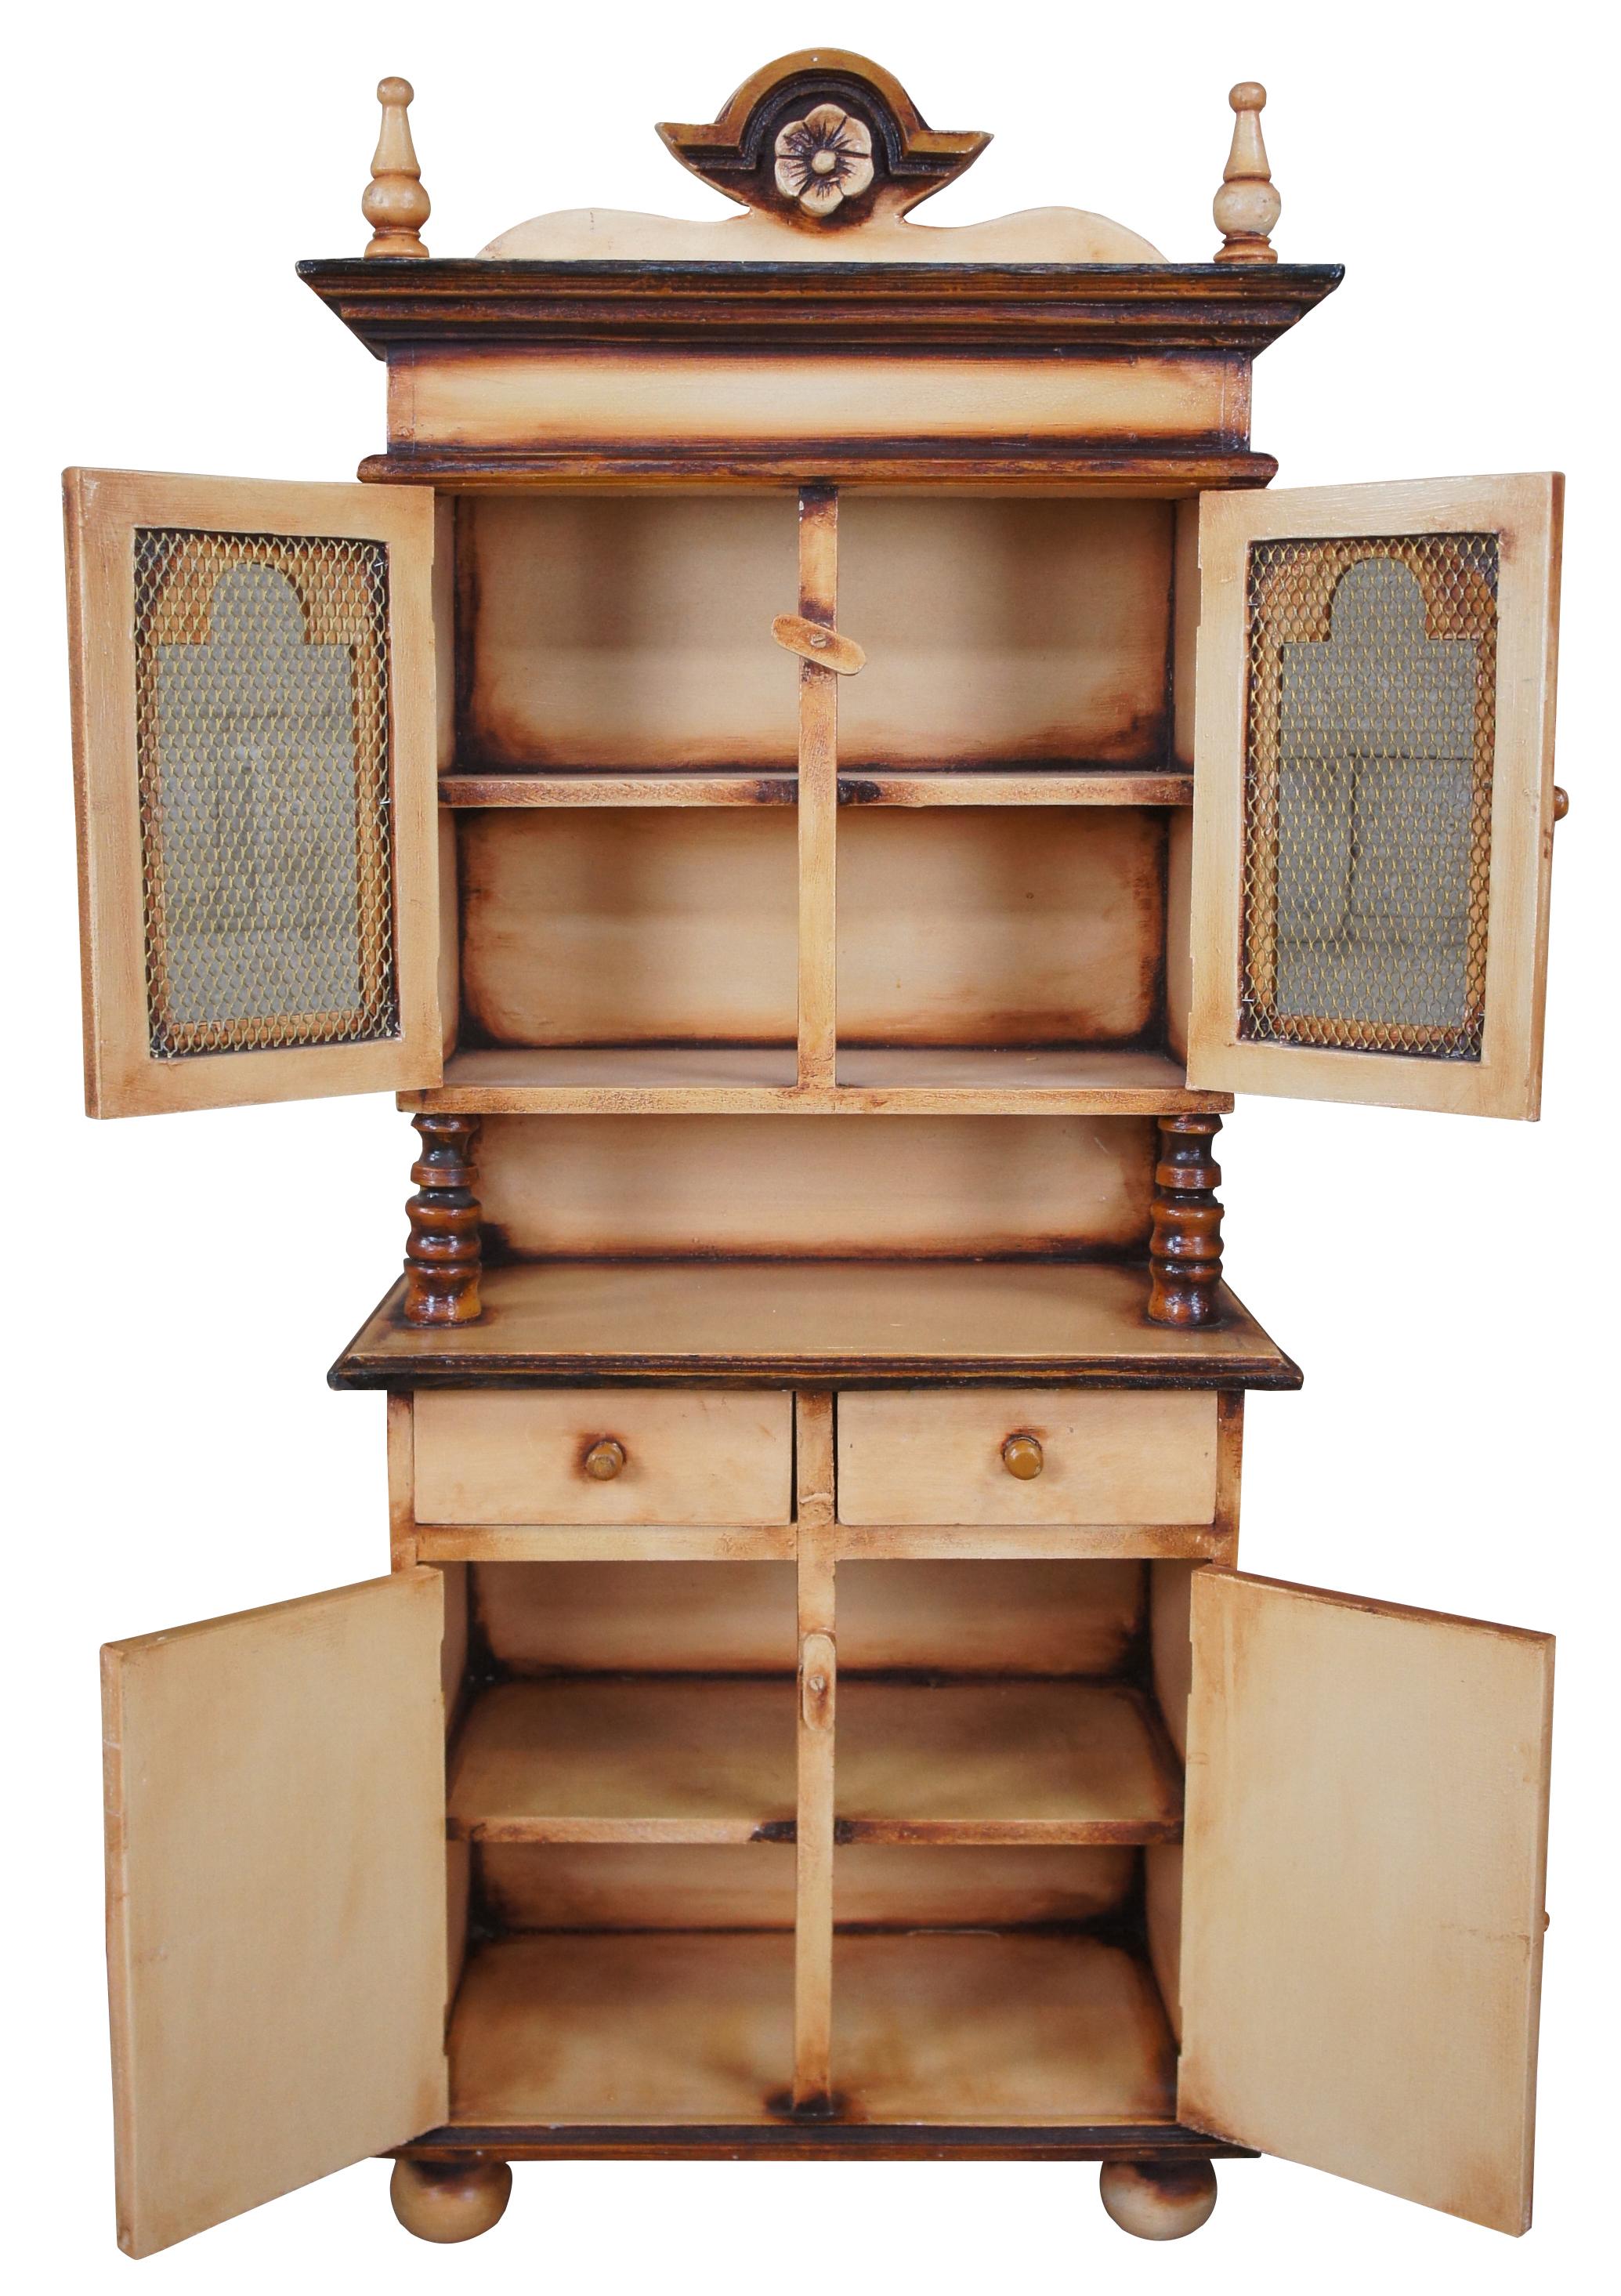 Antique miniature Folk Art stepback cupboard with wire mesh doors, turned supports and bun feet. Measure: 42